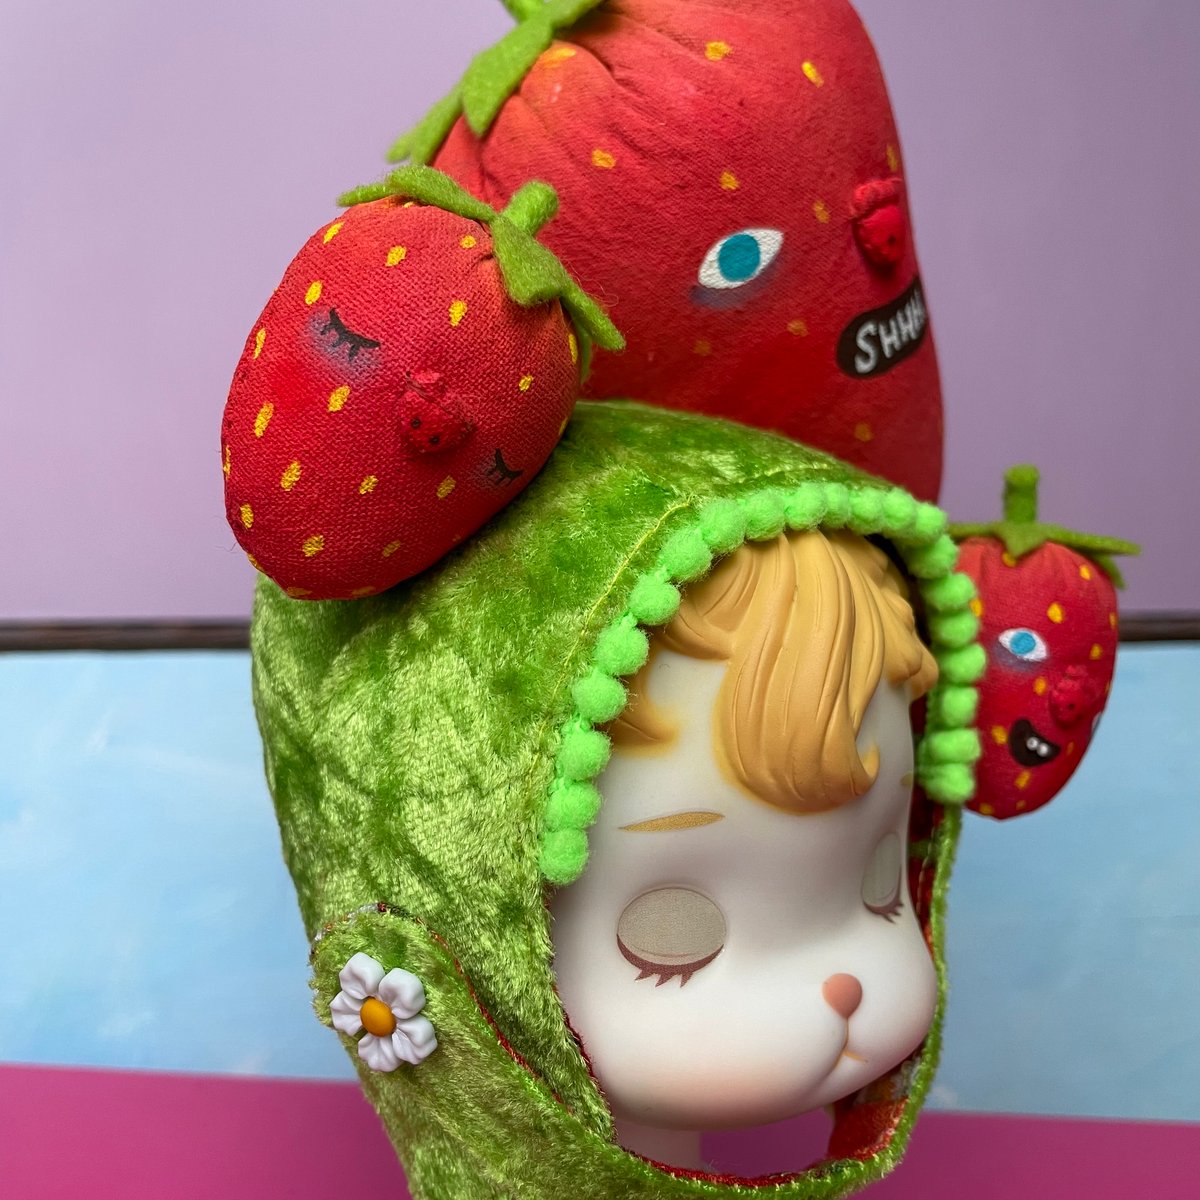 Image of Strawberry Hat for Blythe „Shhh“